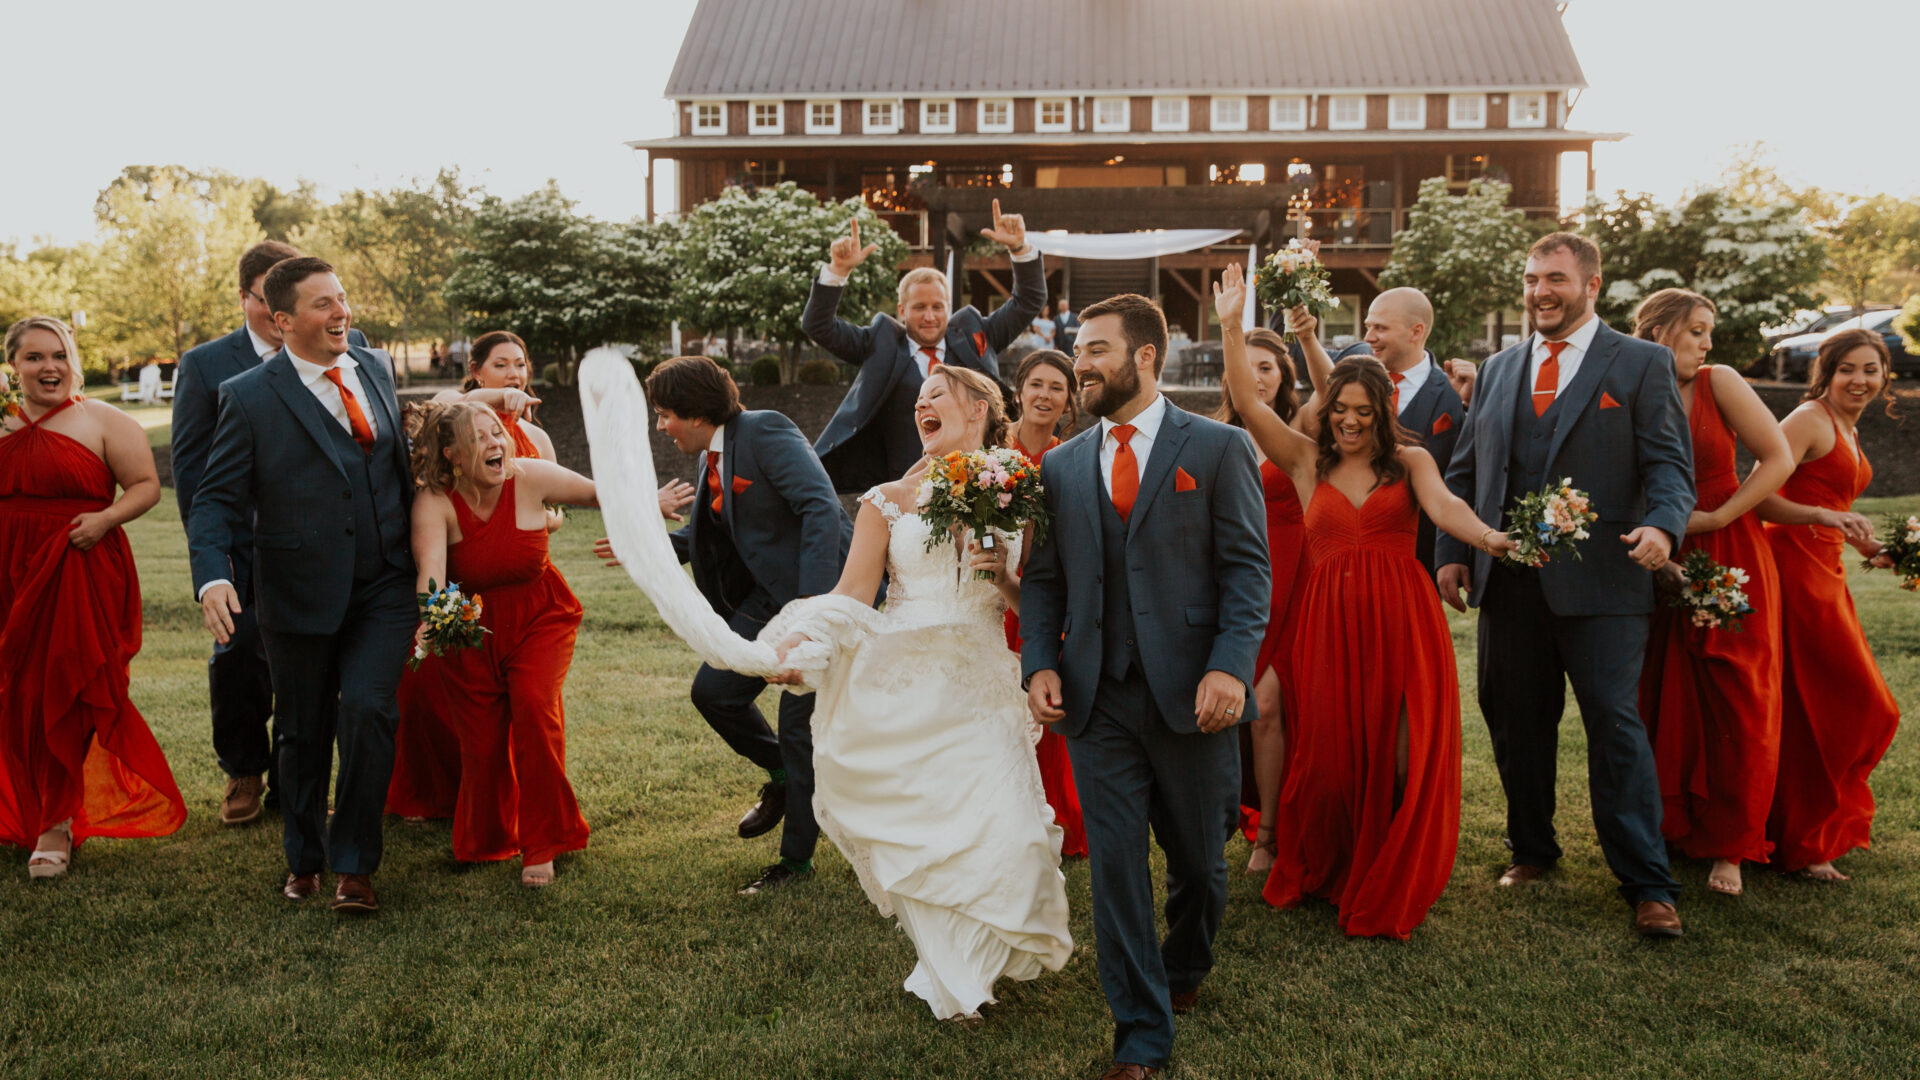 Newlyweds sharing a fun photo op at the barn at Zion Springs, an all-inclusive wedding venue in Northern Virginia.